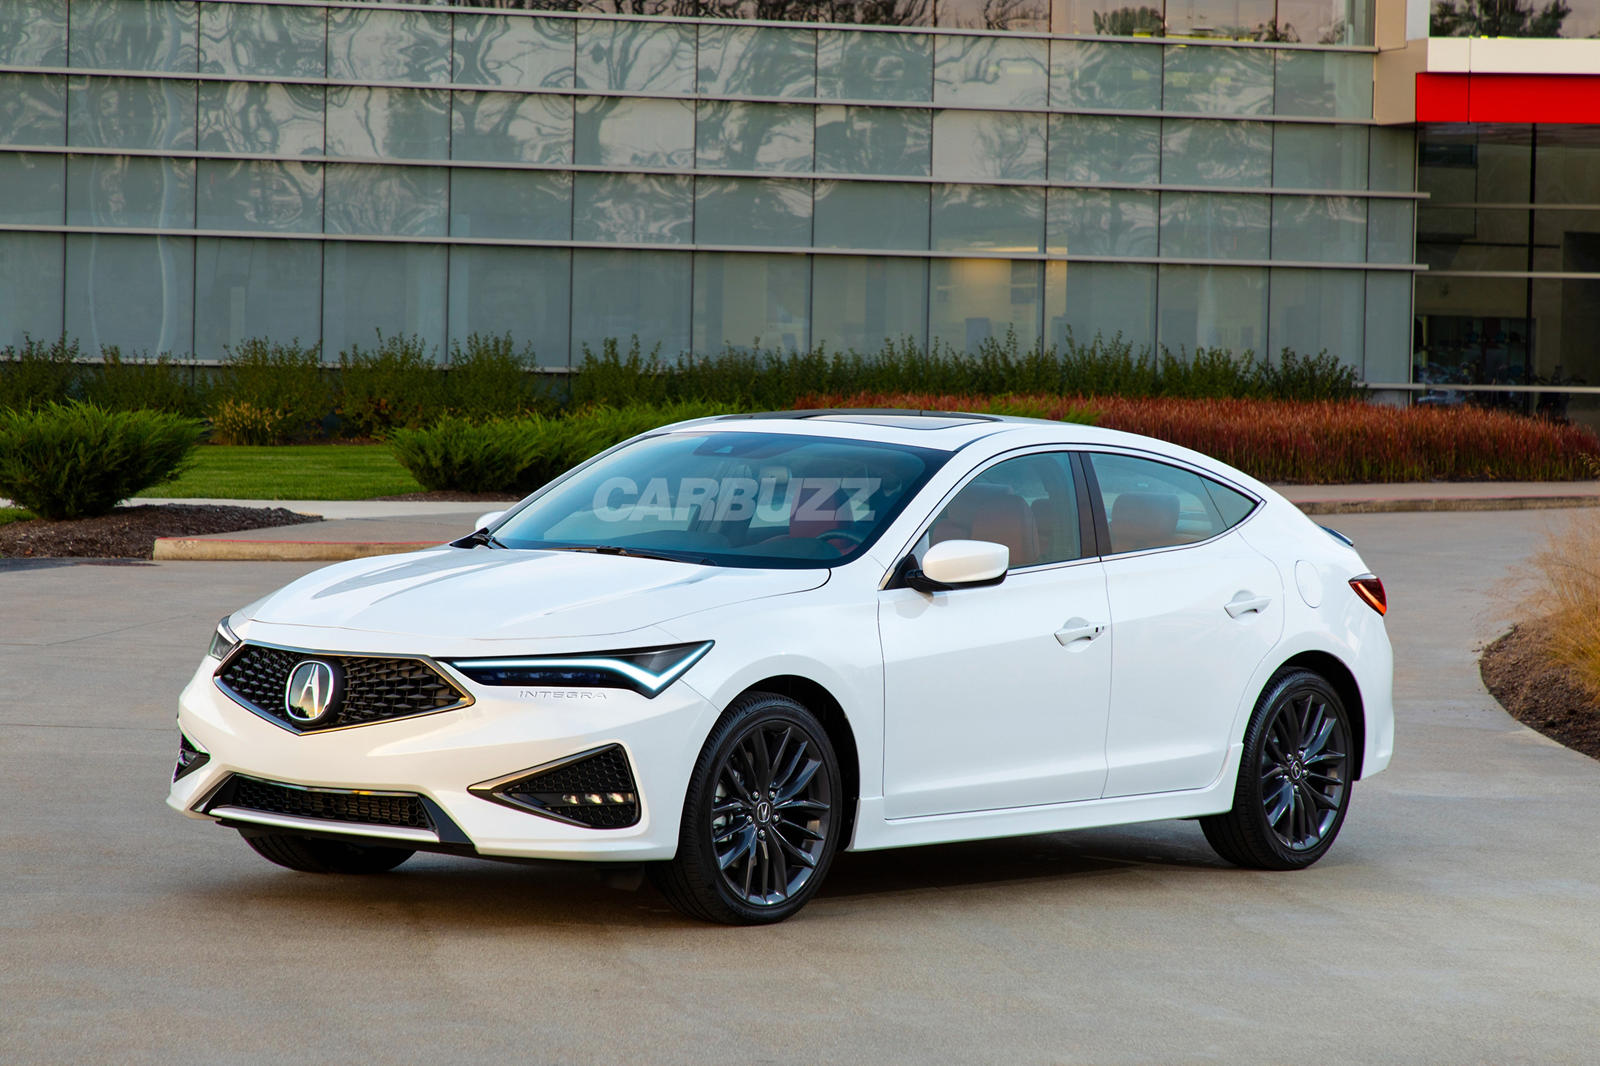 Get Ready For The Big Reveal Of The New Acura Integra | CarBuzz